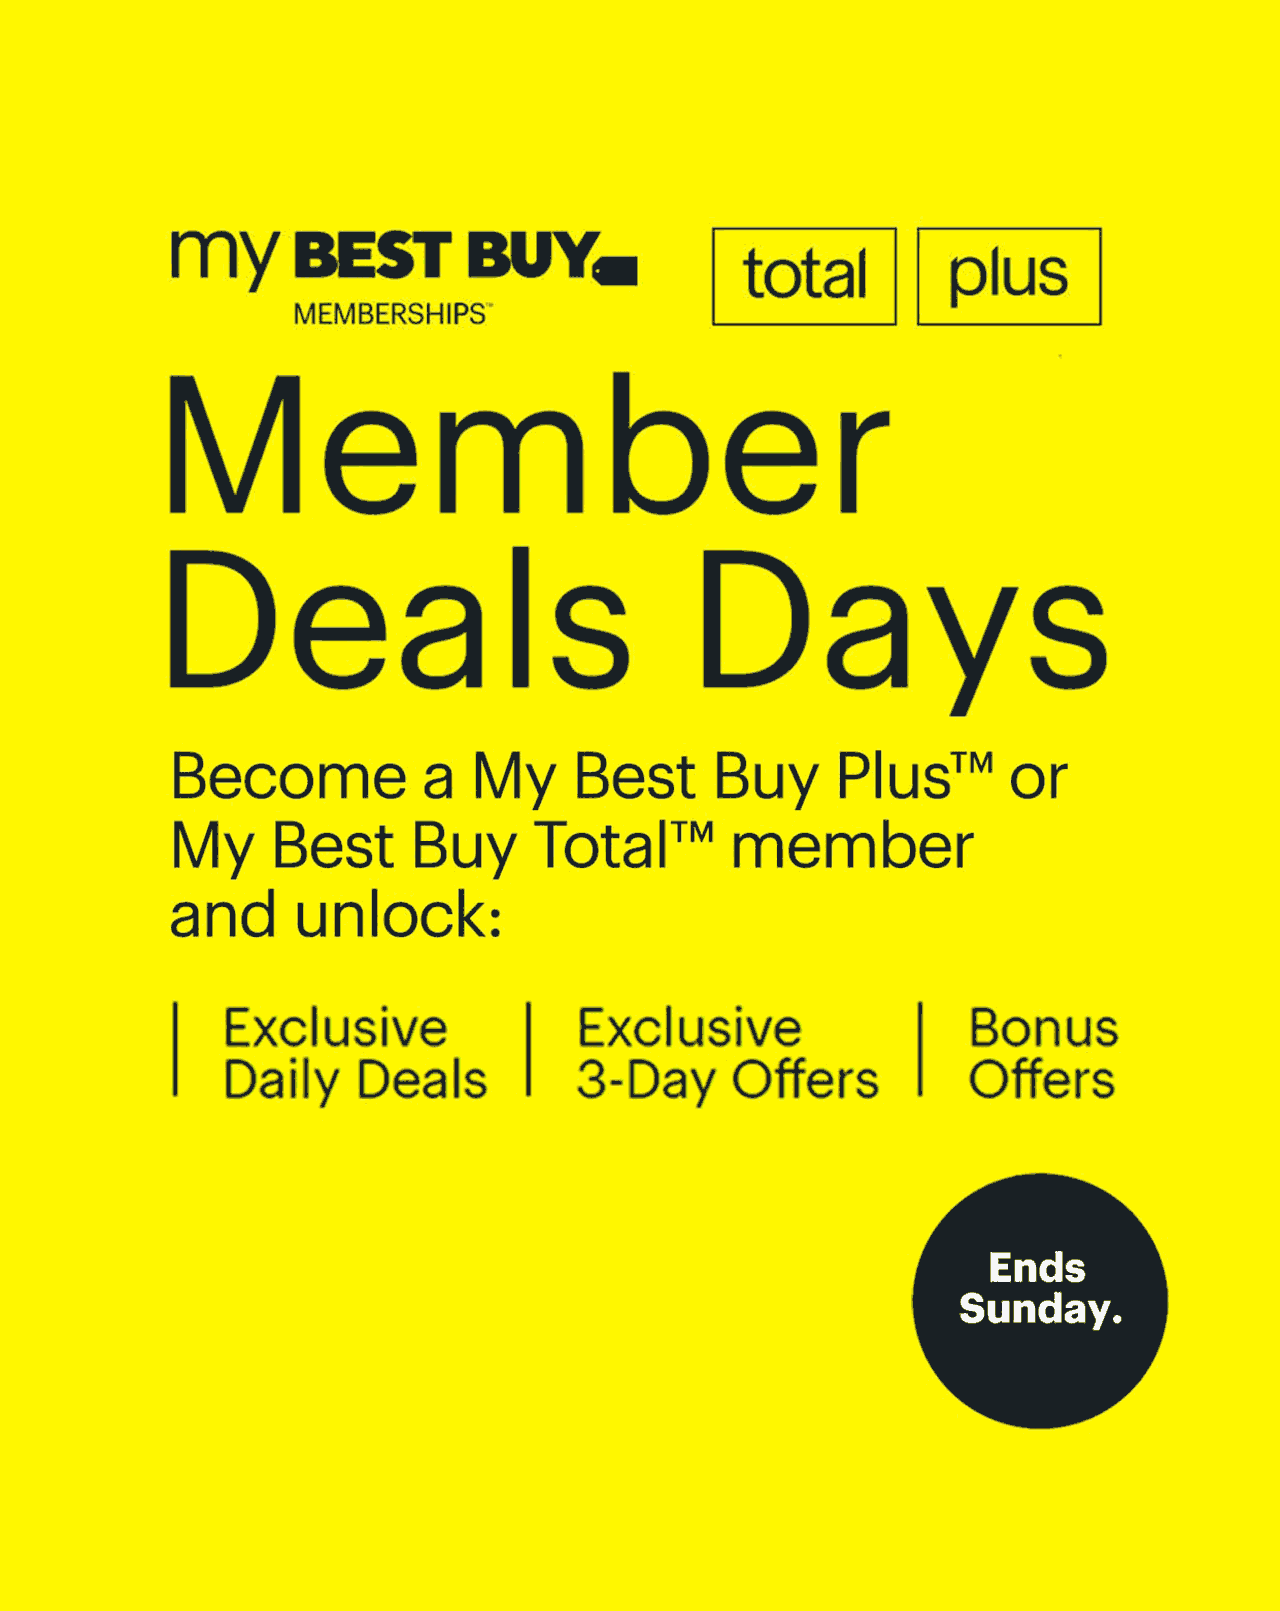 Member Deals Days. Become a My Best Buy Plus™ or My Best Buy Total™ member and unlock exclusive daily deals, exclusive 3-day offers, and bonus offers. Join today. Ends Sunday. Reference disclaimer.